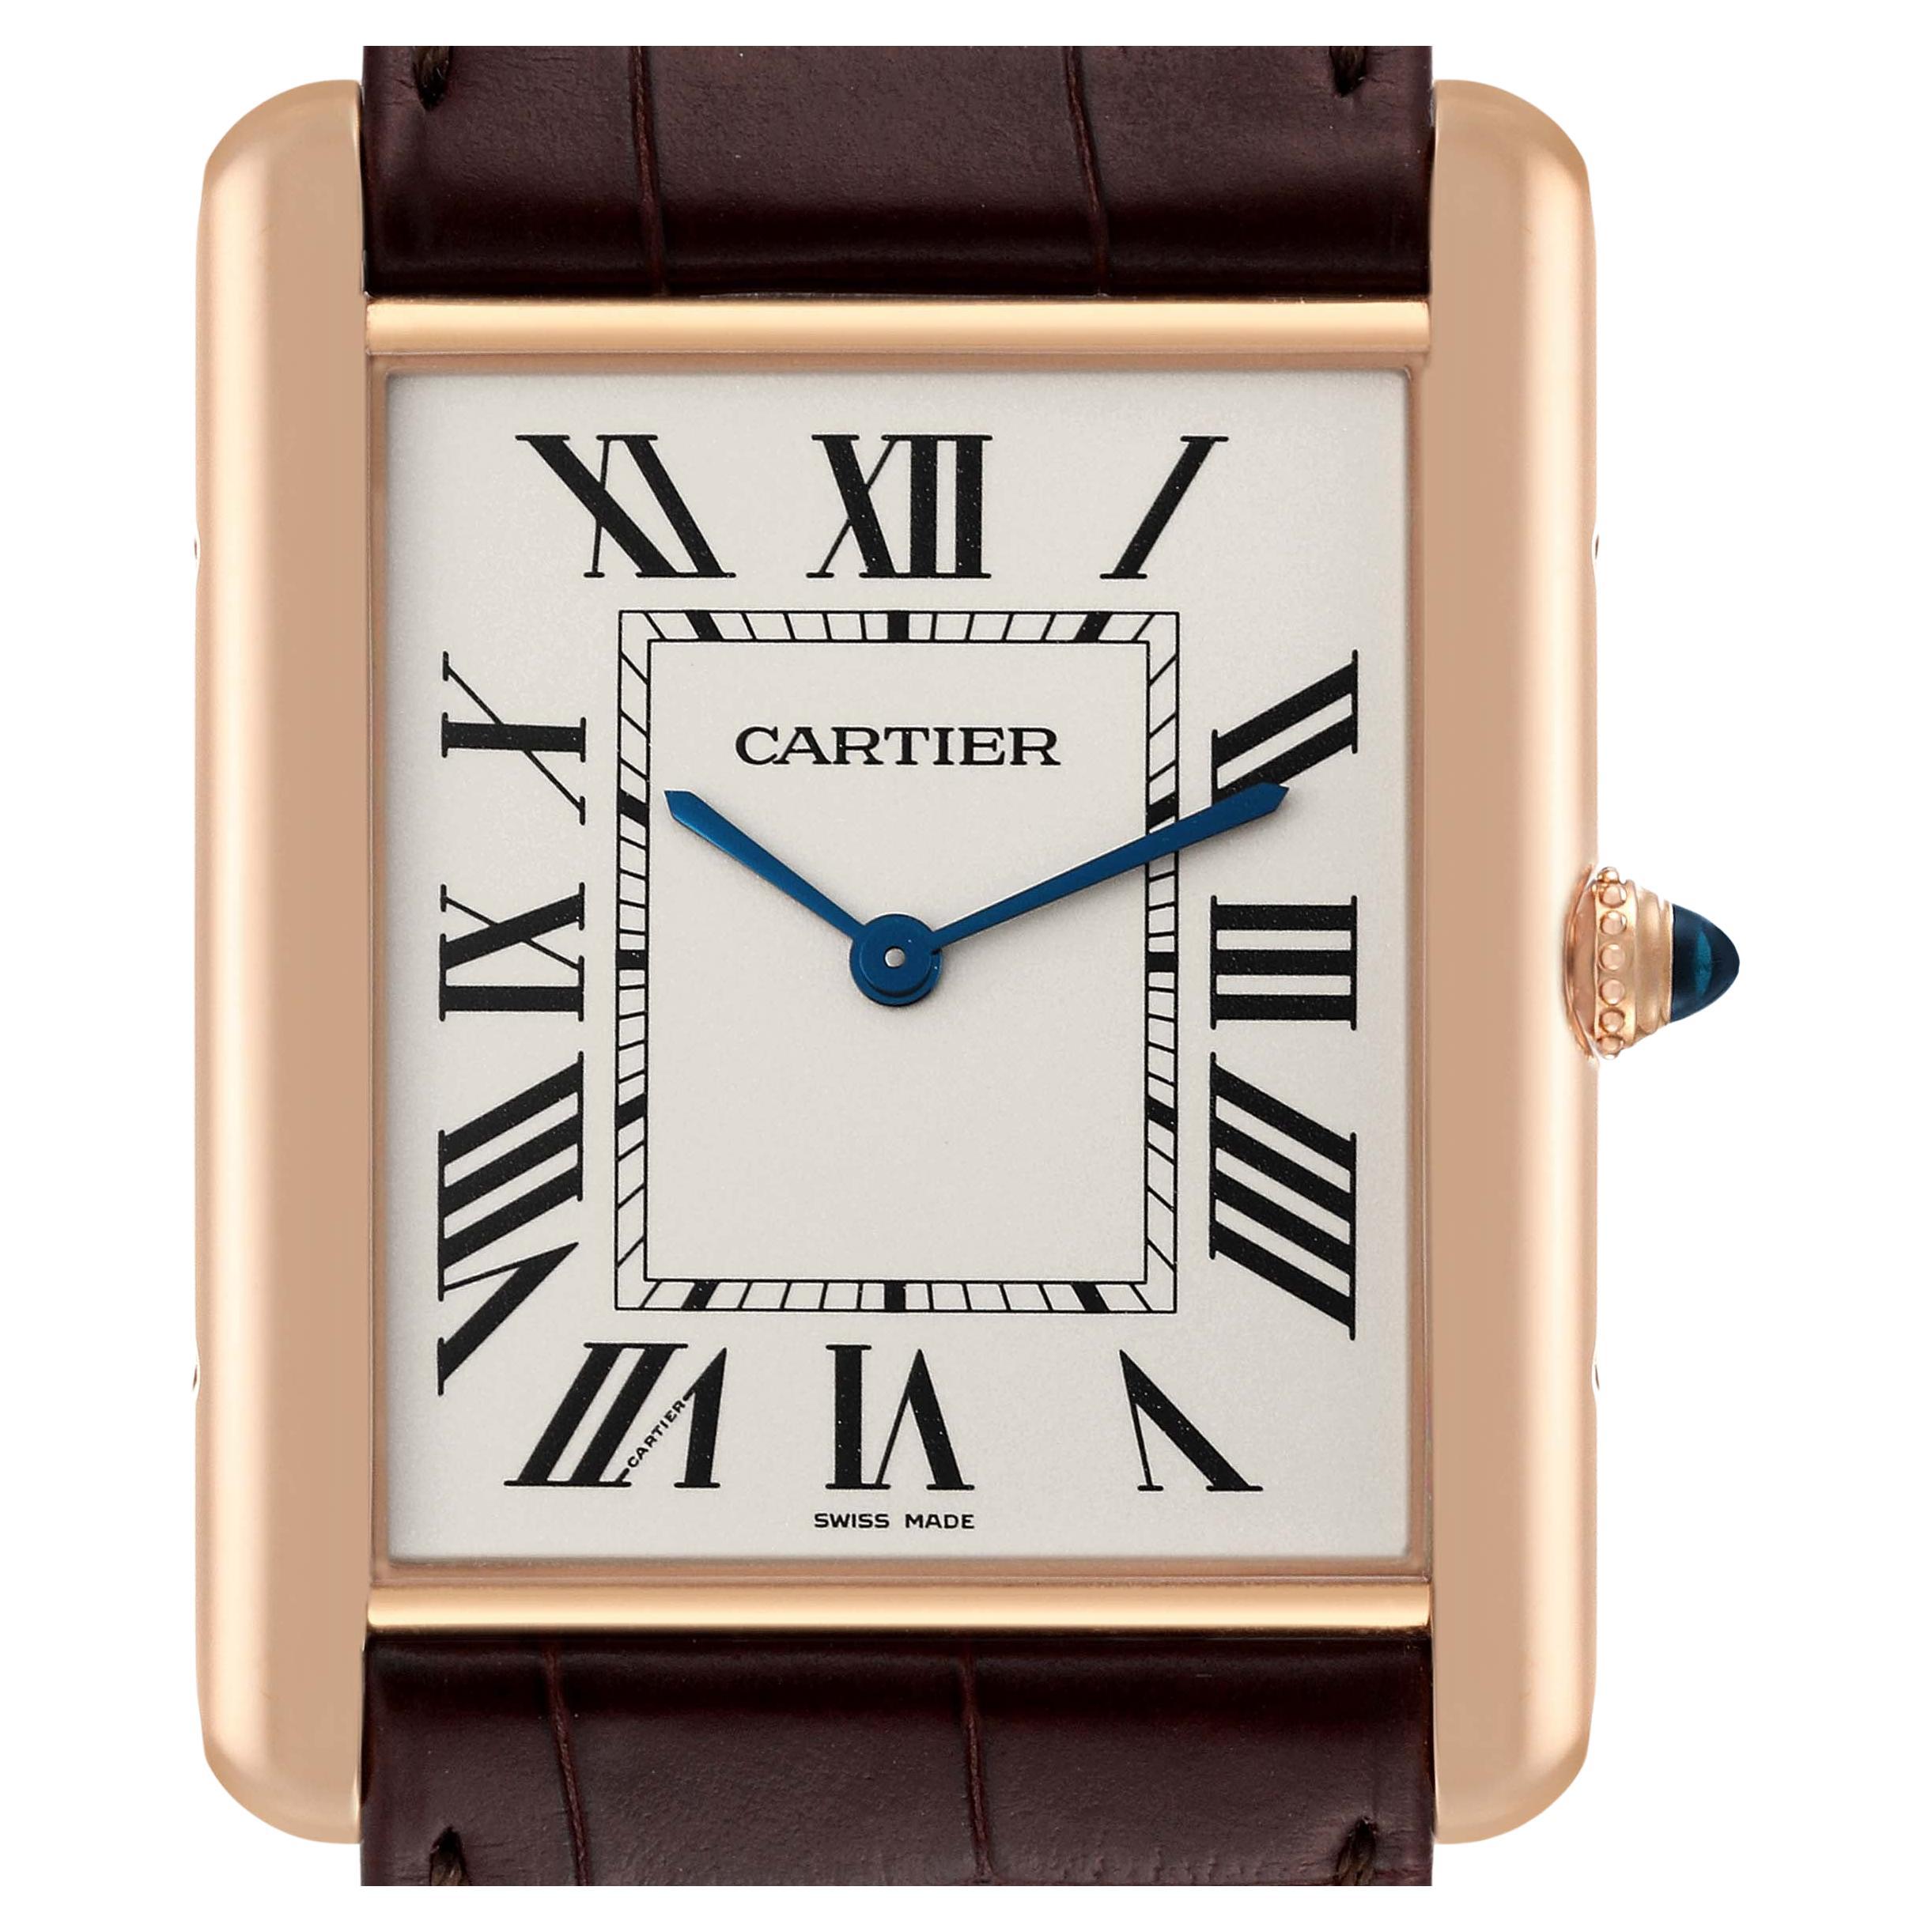 Cartier - Hands on review of the Louis Cartier extra-flat